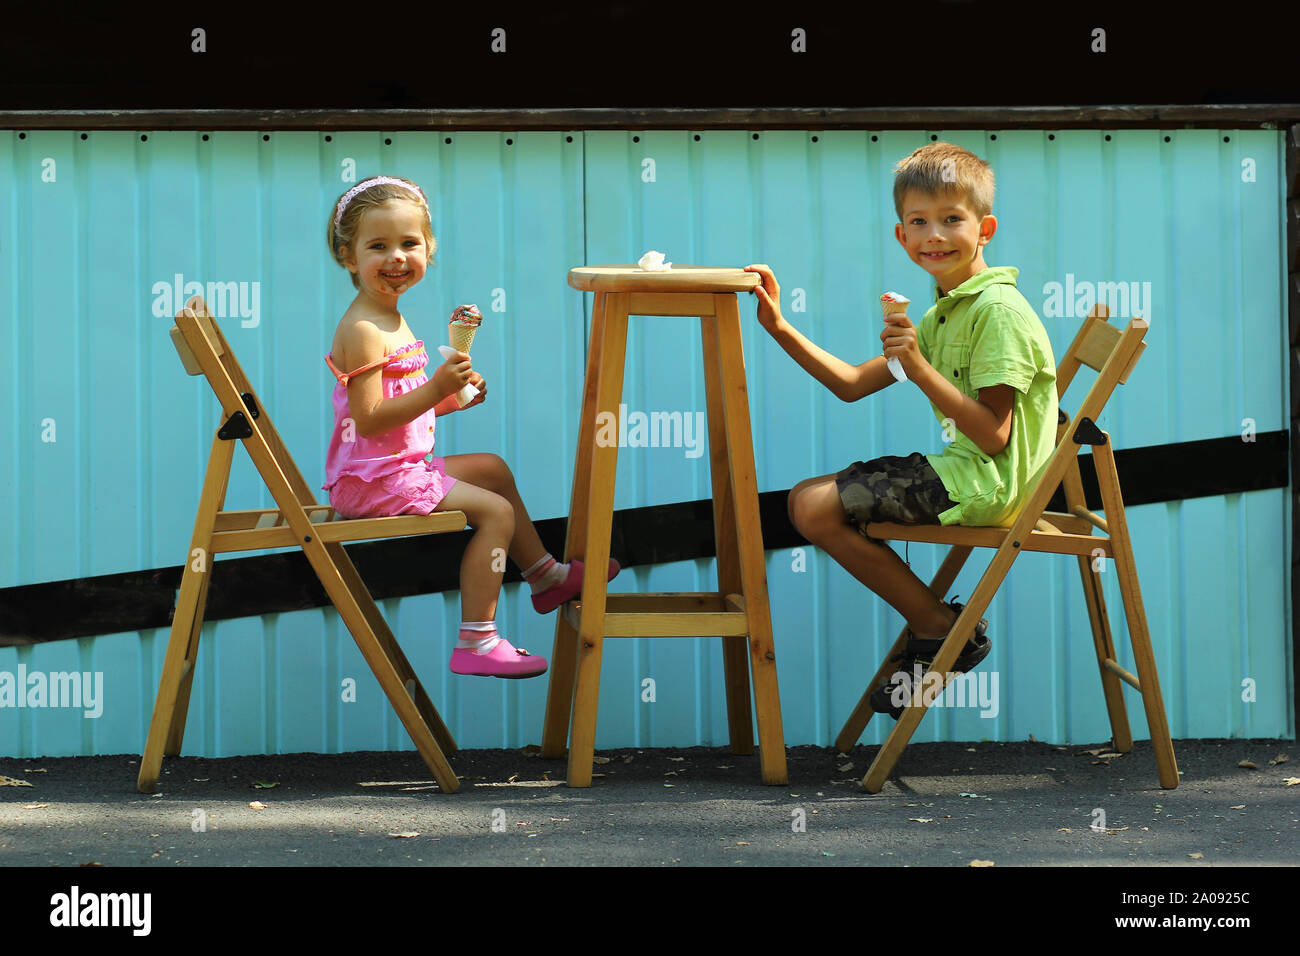 Happy boy and girl, brother and sister, eating ice cream in the open air outdoor sidewalk city summer cafe Stock Photo